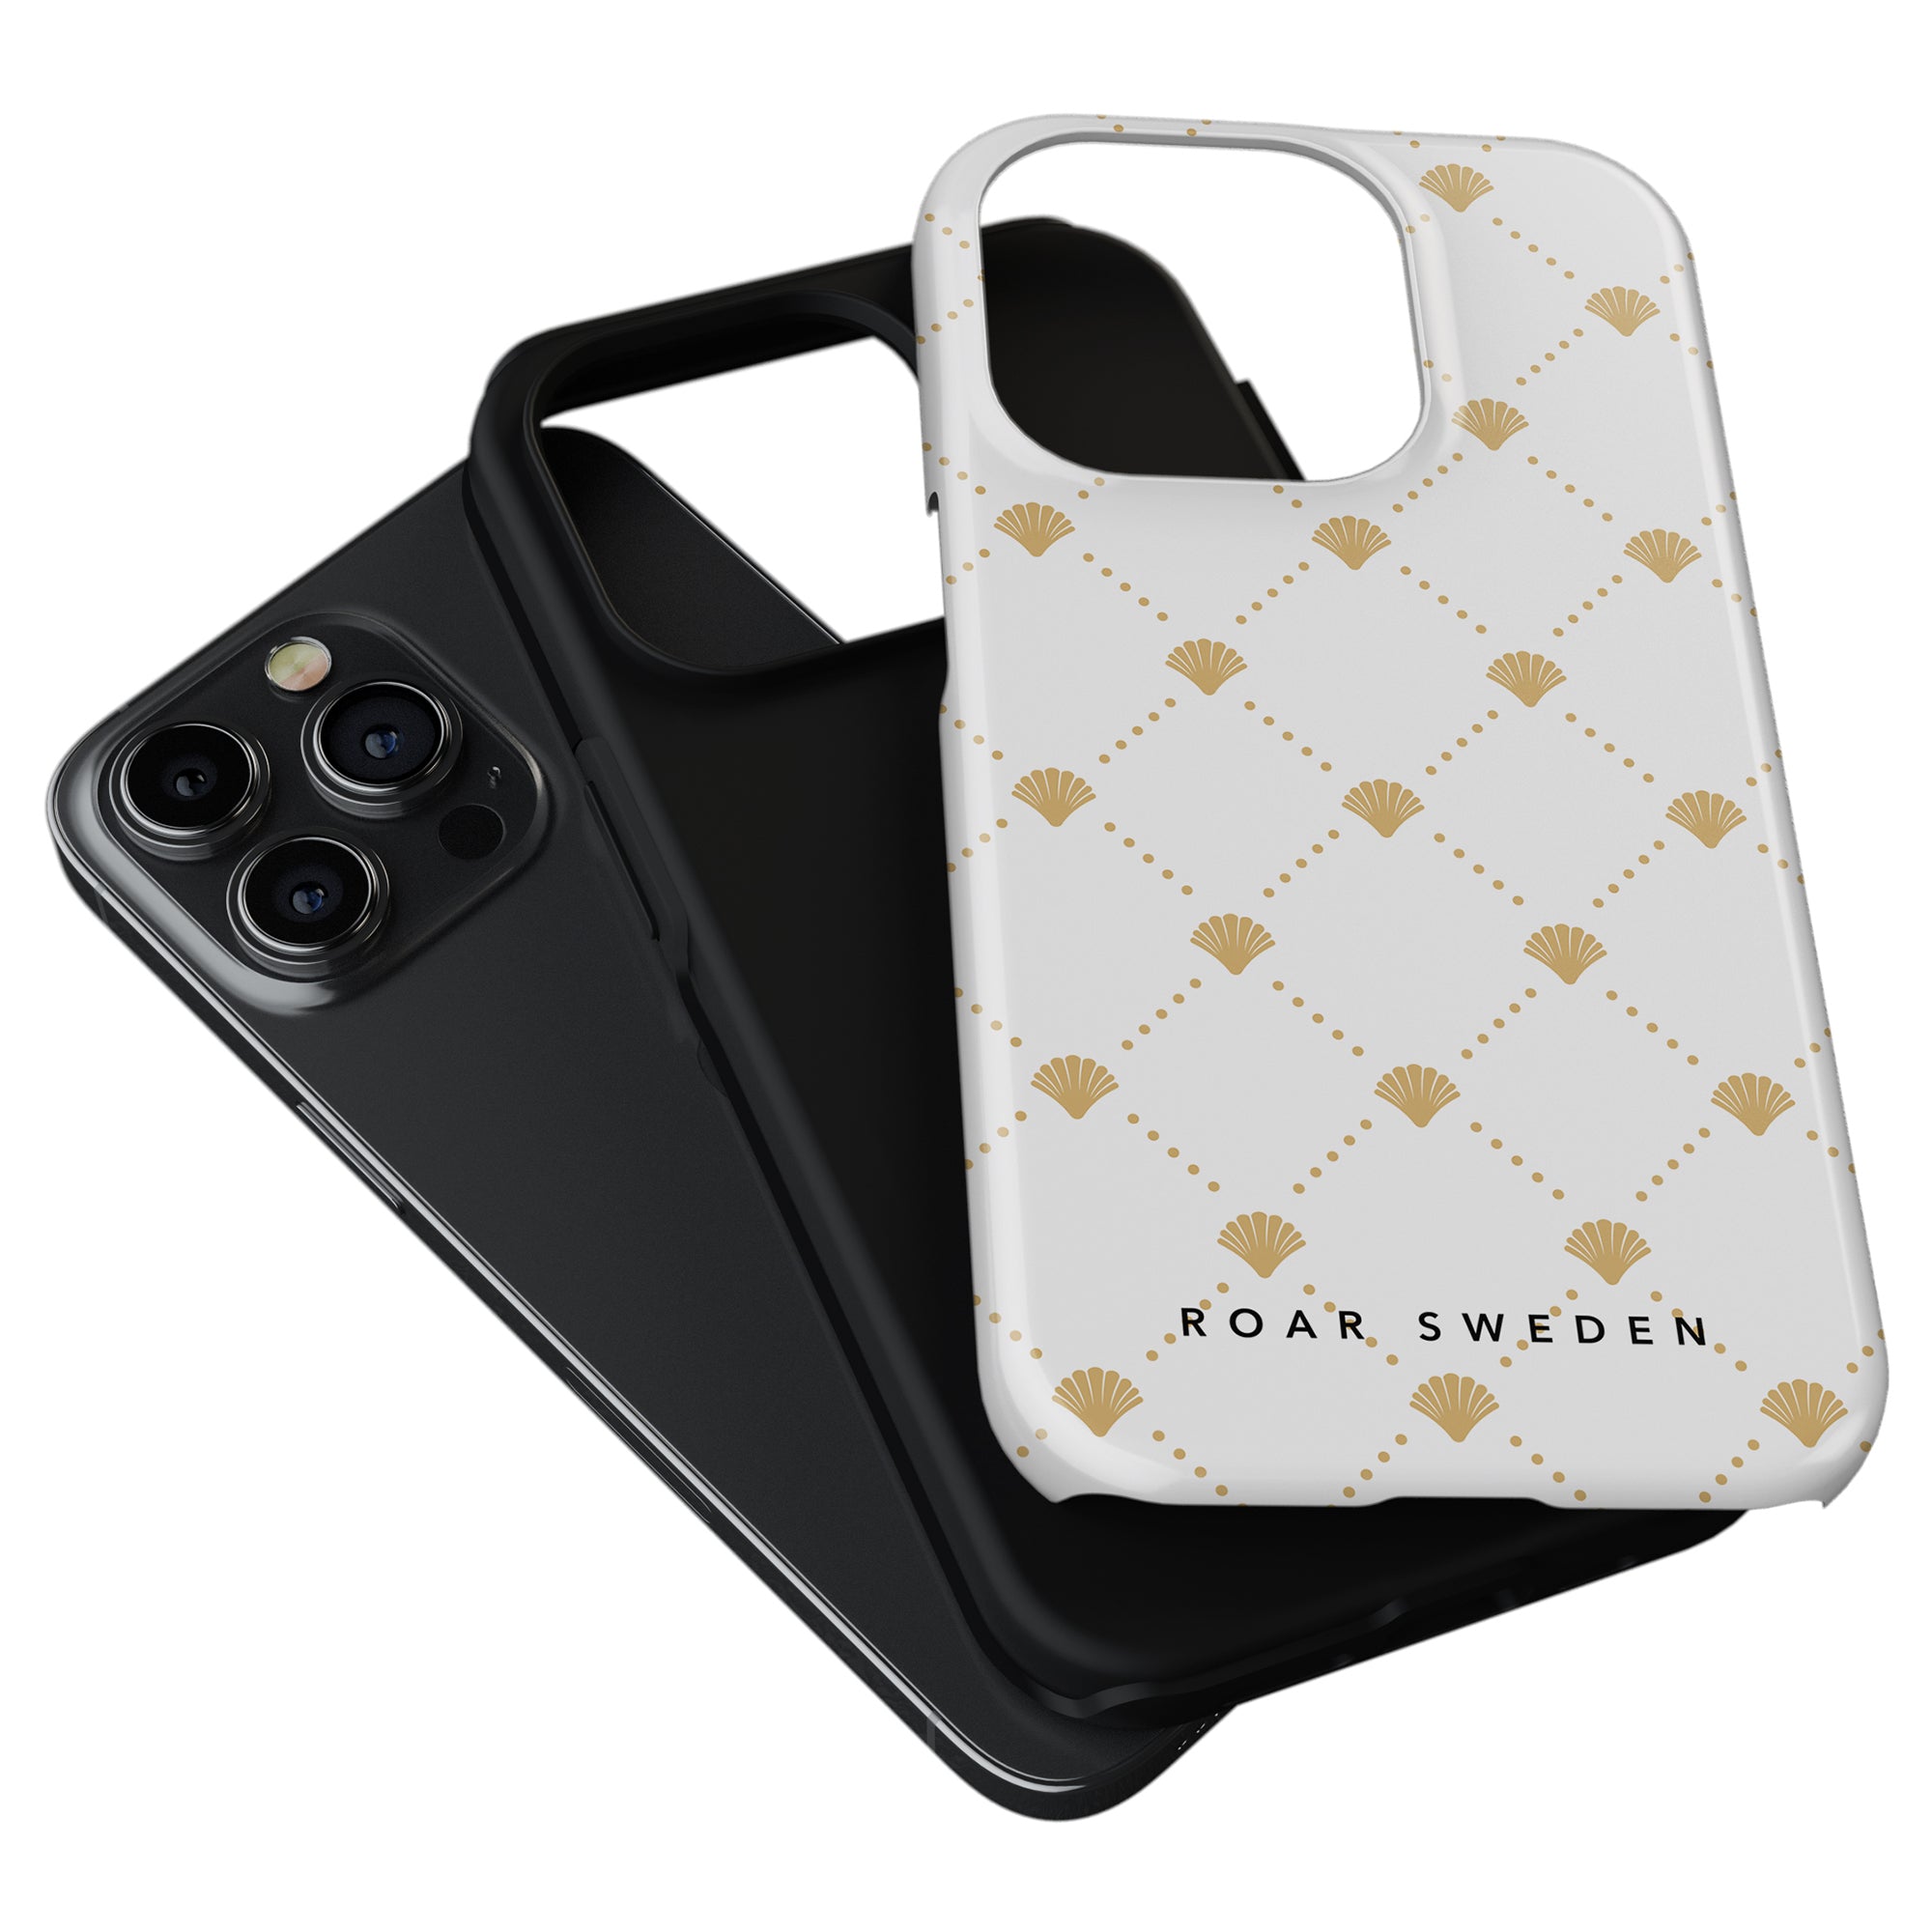 Two smartphone cases; one black, and one Luxe Shells White - Tough Case with a gold shell pattern, part of the Ocean Collection, labeled "ROAR SWEDEN." The white case is partially covering the back of a smartphone with a triple camera setup.